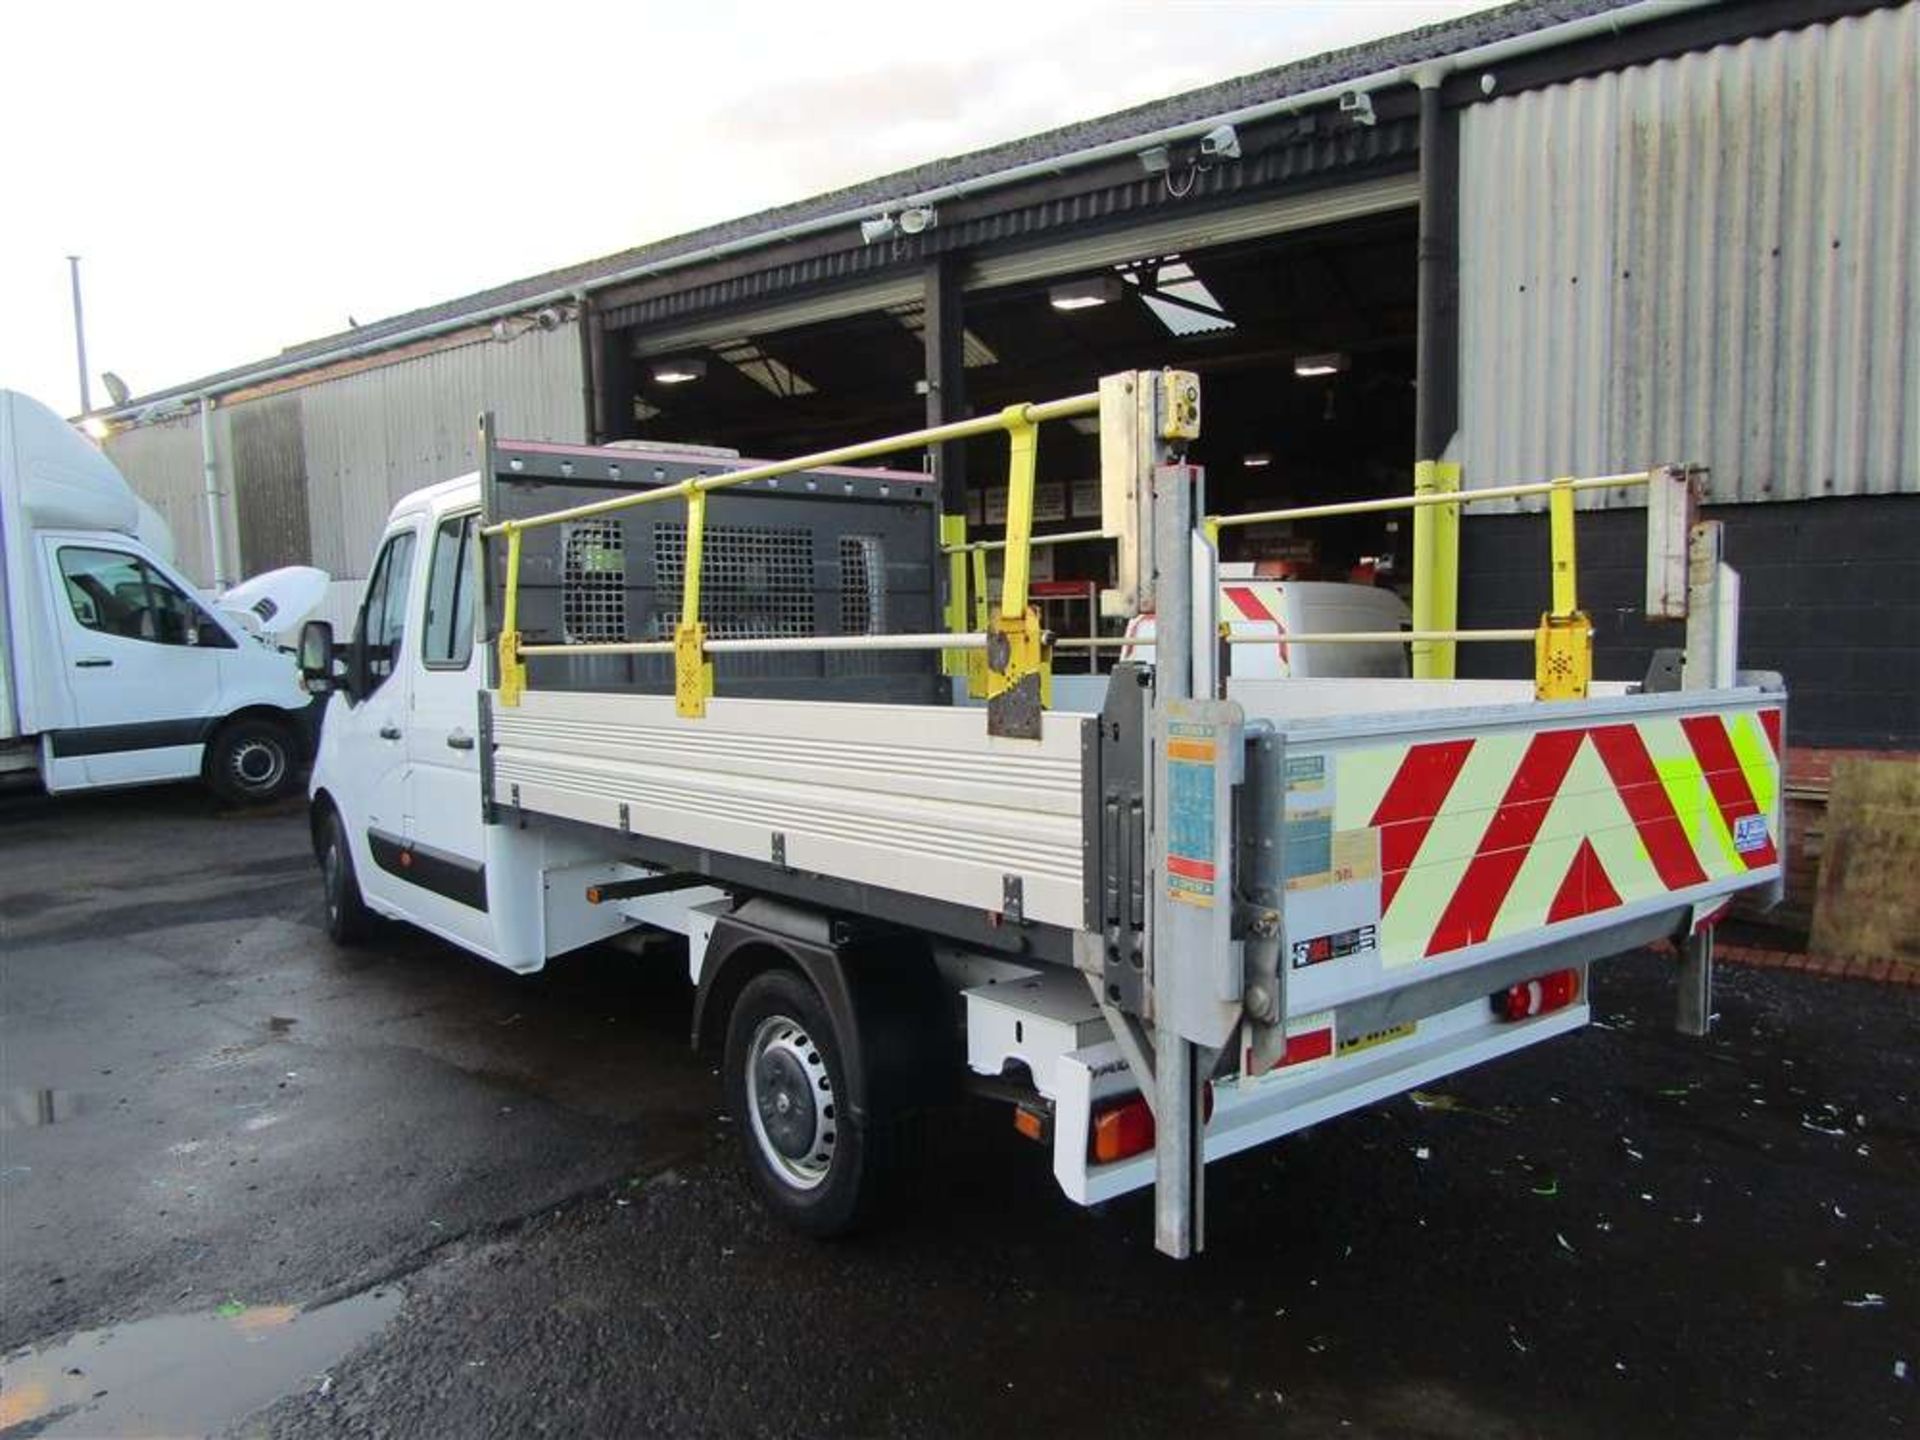 2019 19 reg Vauxhall Movano L3H1 F3500 CDTI Tipper (ONLY 19K+ MILES) - Image 3 of 8